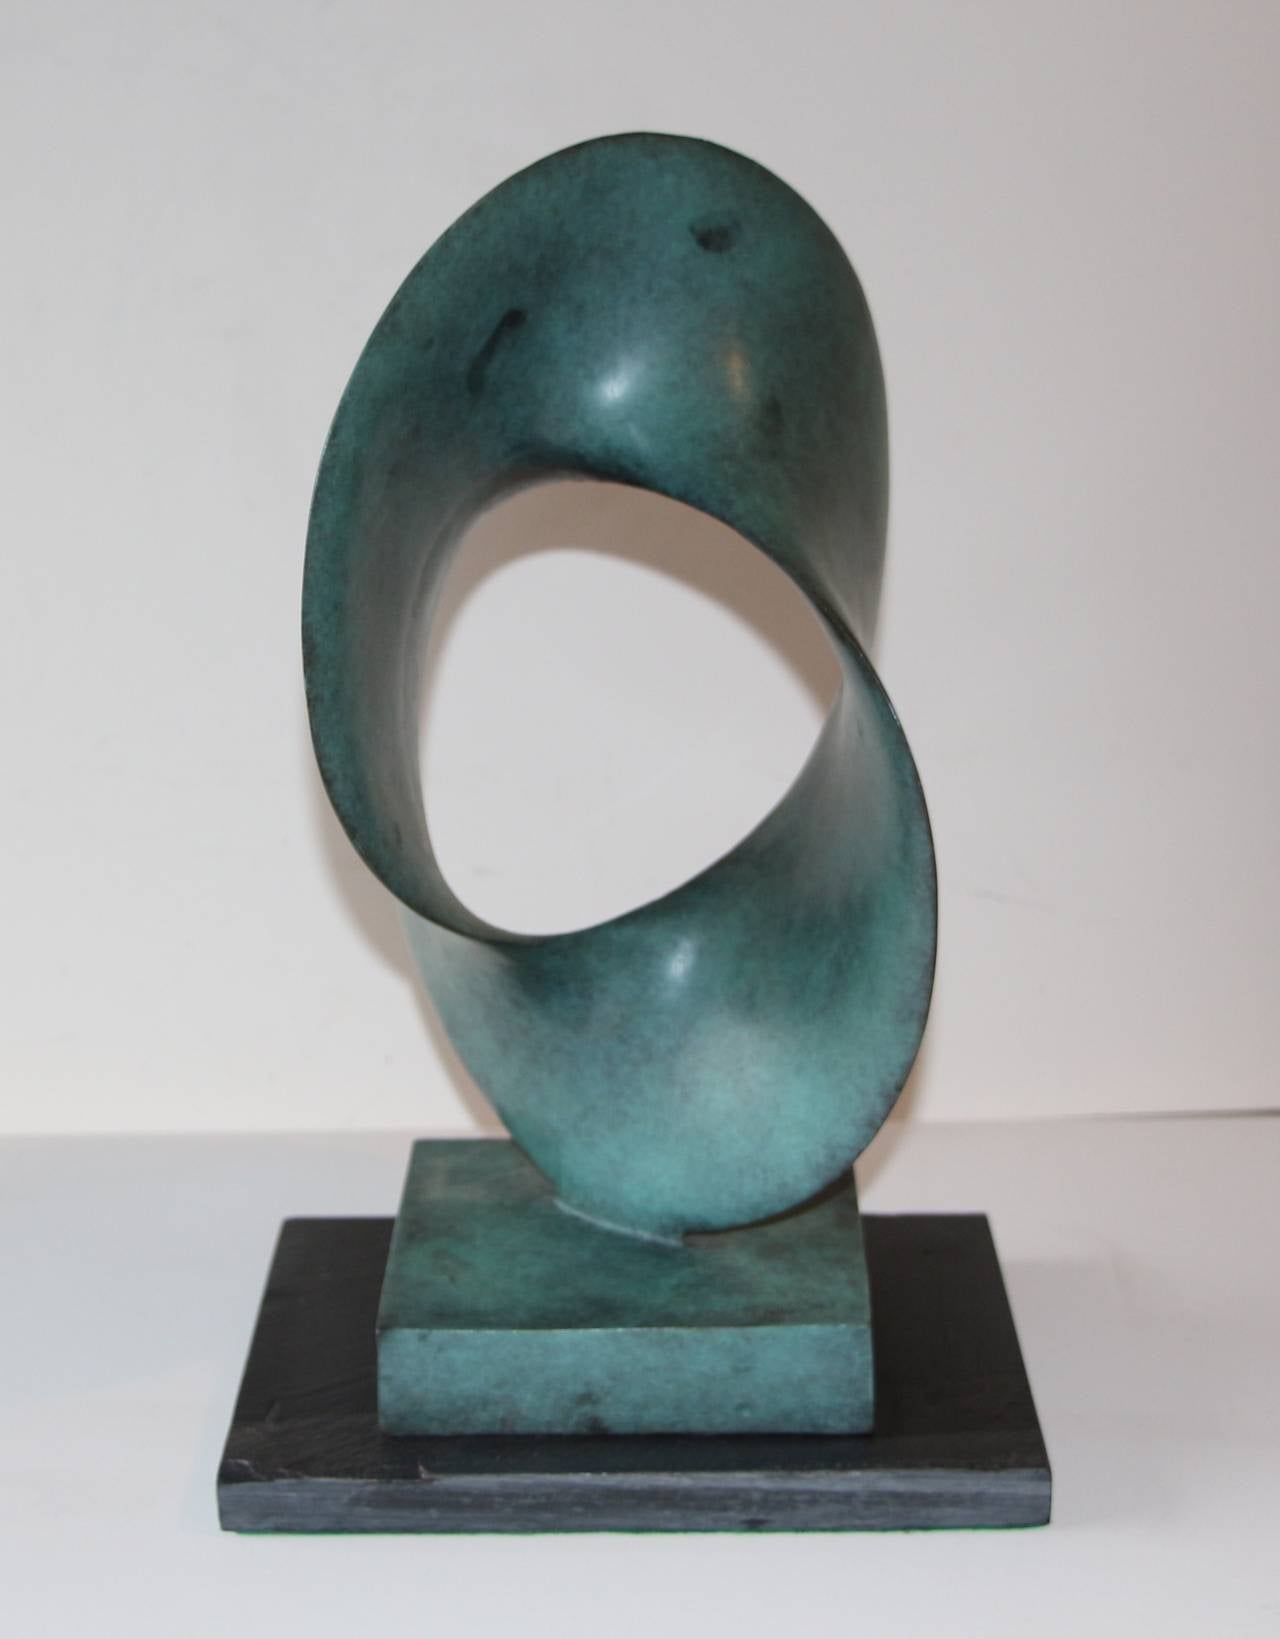 A great bronze wonderfully patinated and mounted on a slate base. It is signed Schumacher and dated 1989. We were lucky to acquire a number of this artist's works.
From a 2012 article the following provides some insight into the artist:
Gloucester